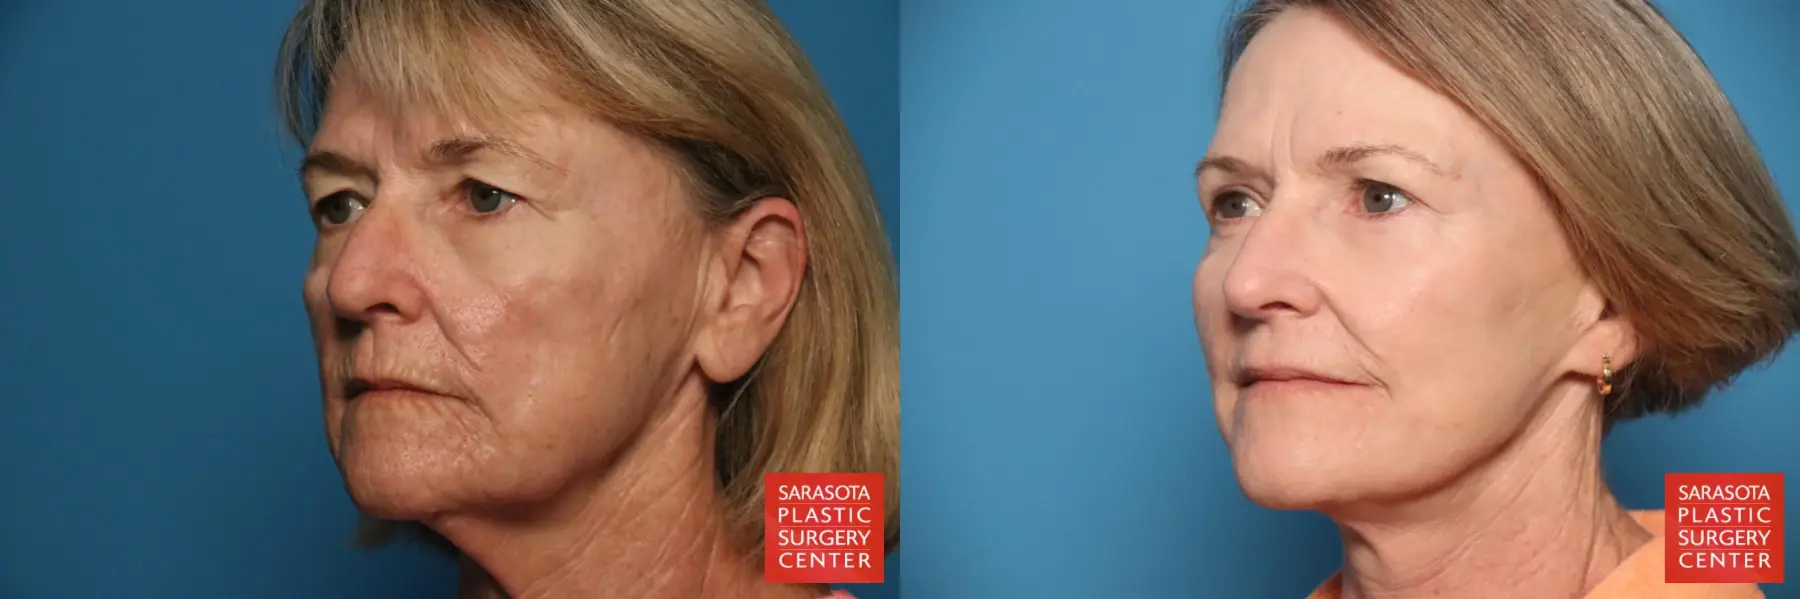 Facelift: Patient 64 - Before and After 2